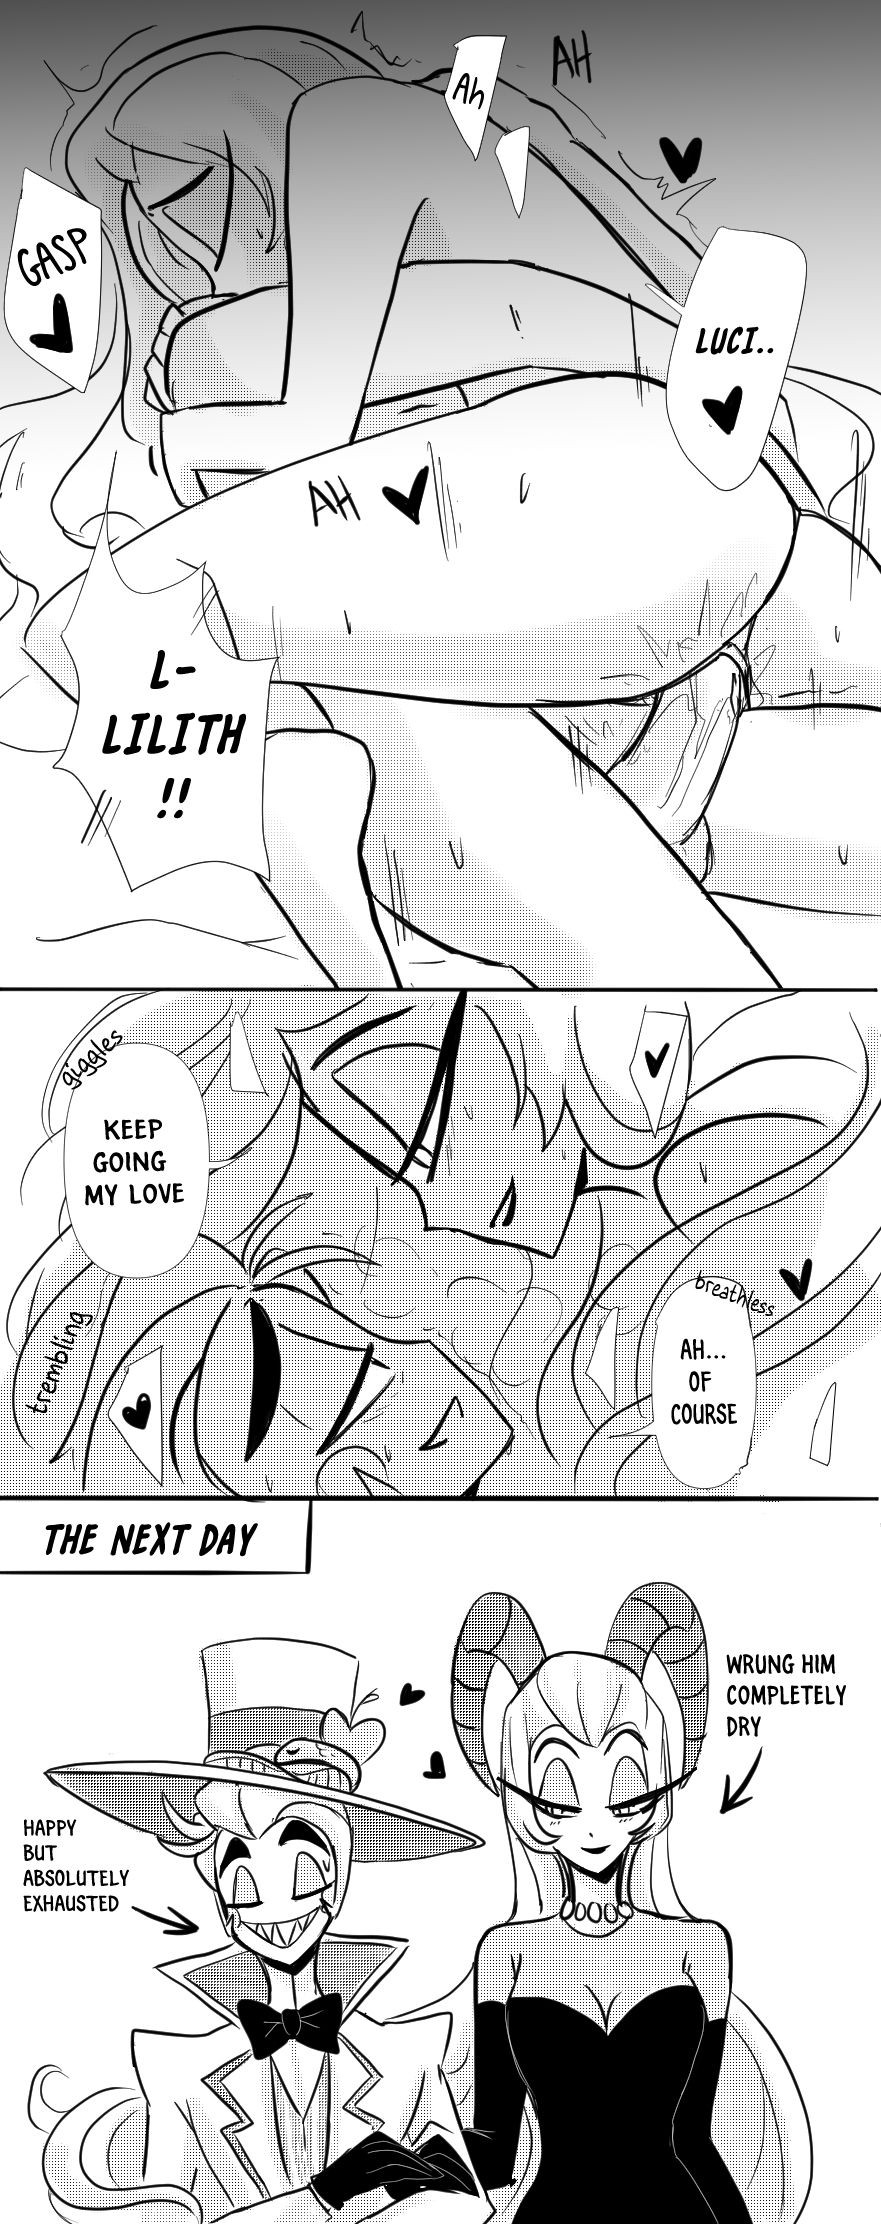 Lucifer and lilith porn comic picture 10